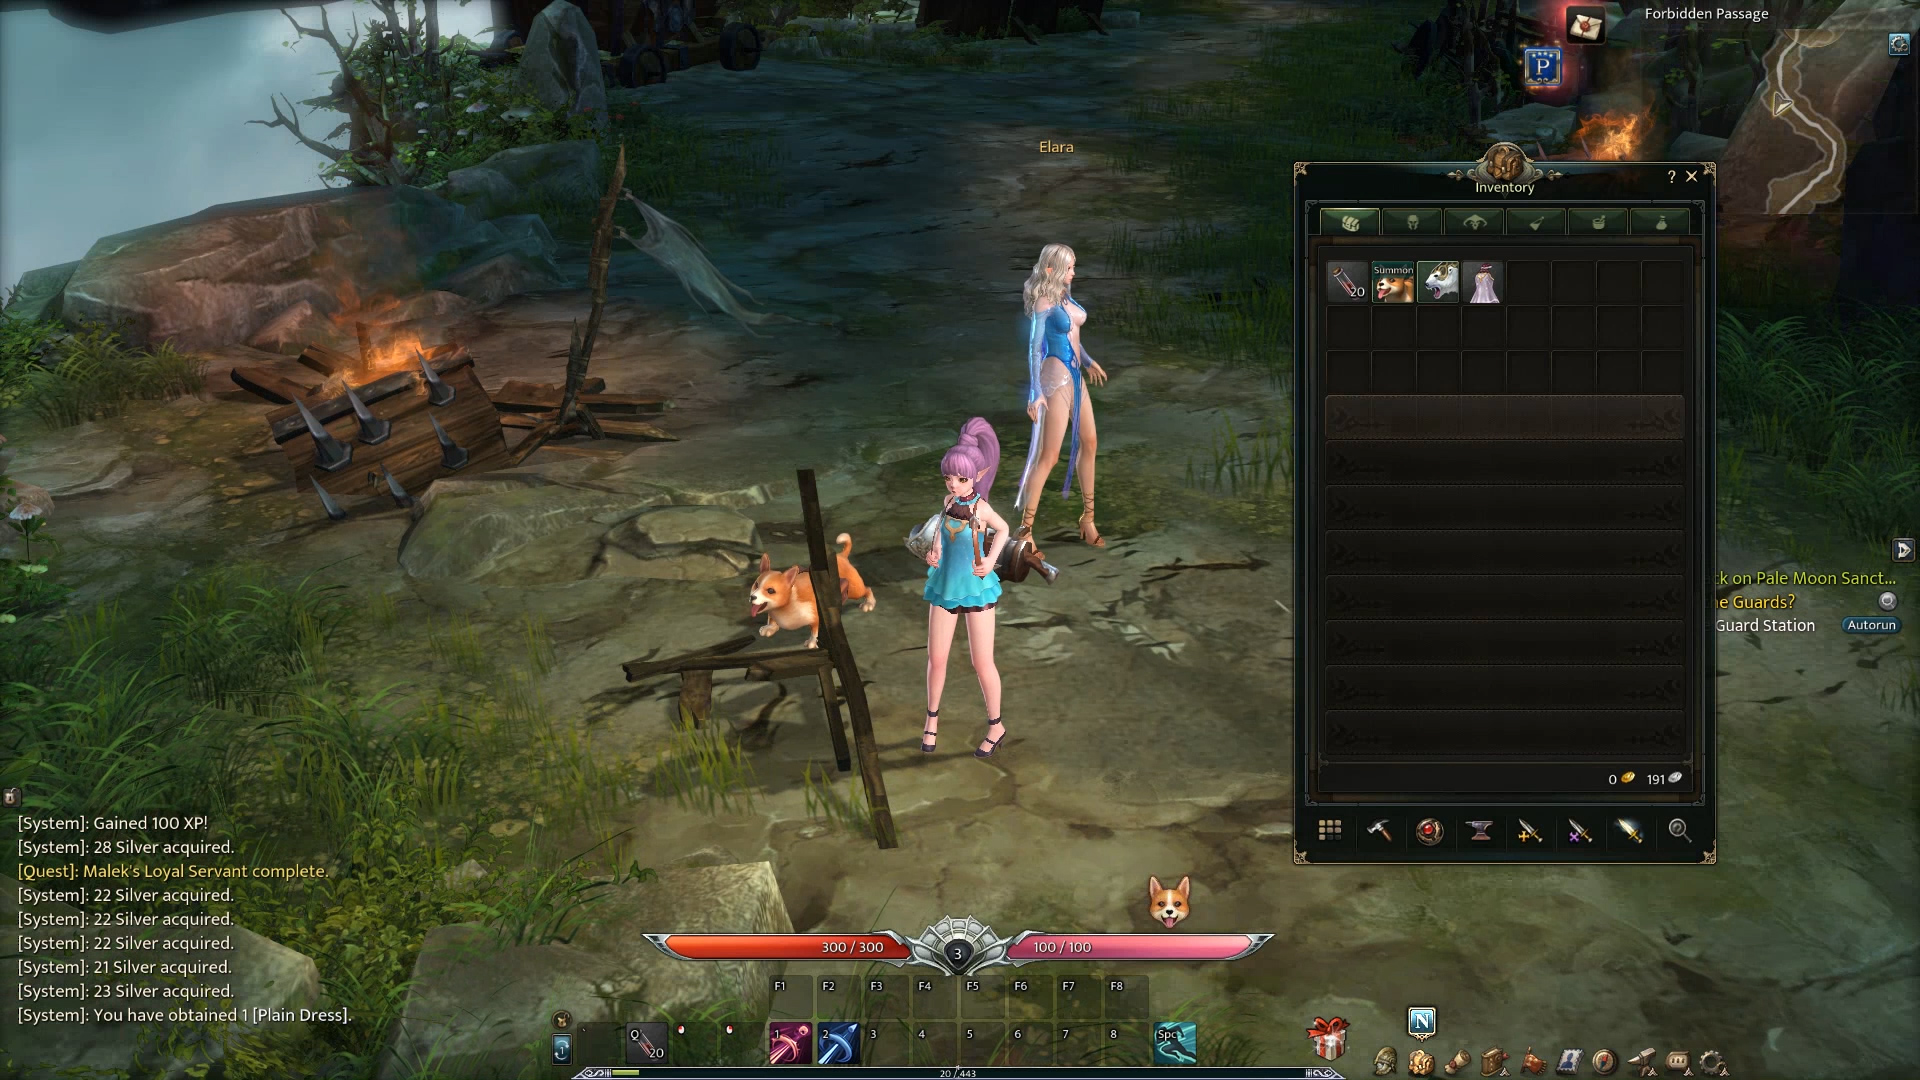 Getting Started With Devilian, The Mildly Awkward Diablo-Style MMO